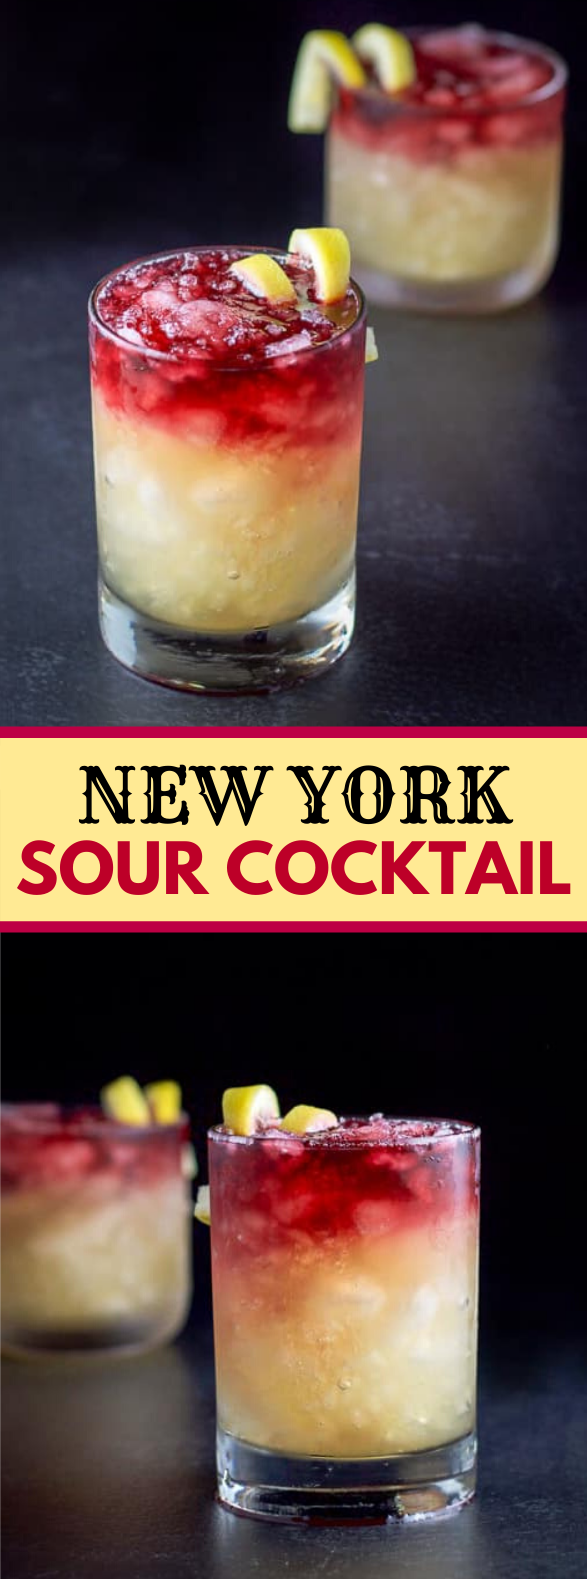 NEW YORK SOUR COCKTAIL #drinks #cocktails